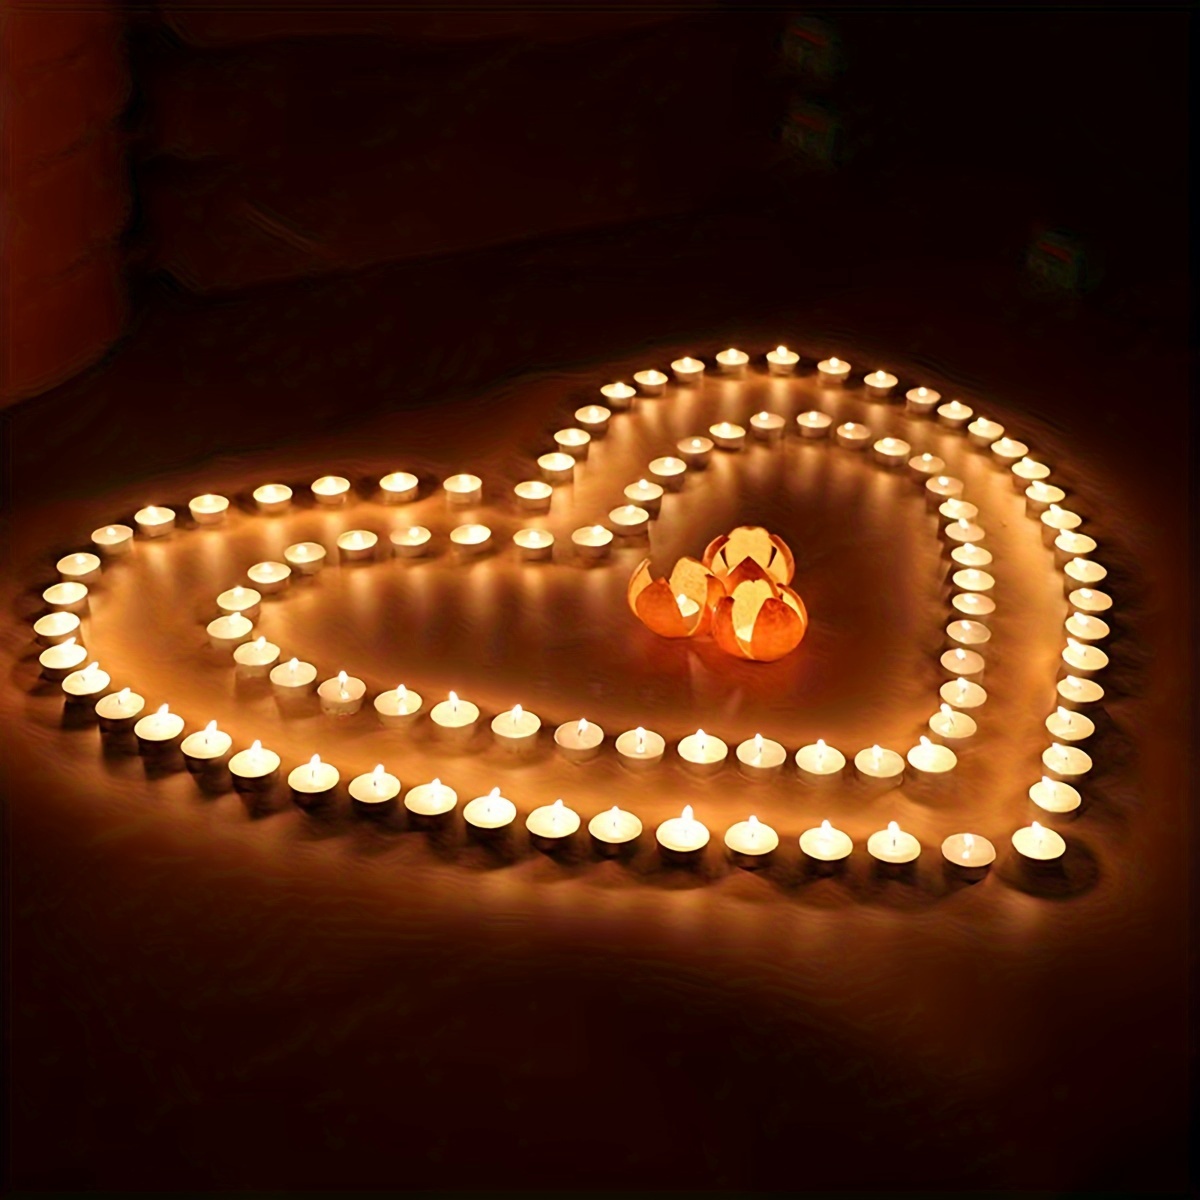 2 Pcs Heart Shape Candles for Valentine's Day, Candles,Dripless & Long Lasting Smokeless Red Heart Shaped Candles for Mood,Romantic Decor,Pool